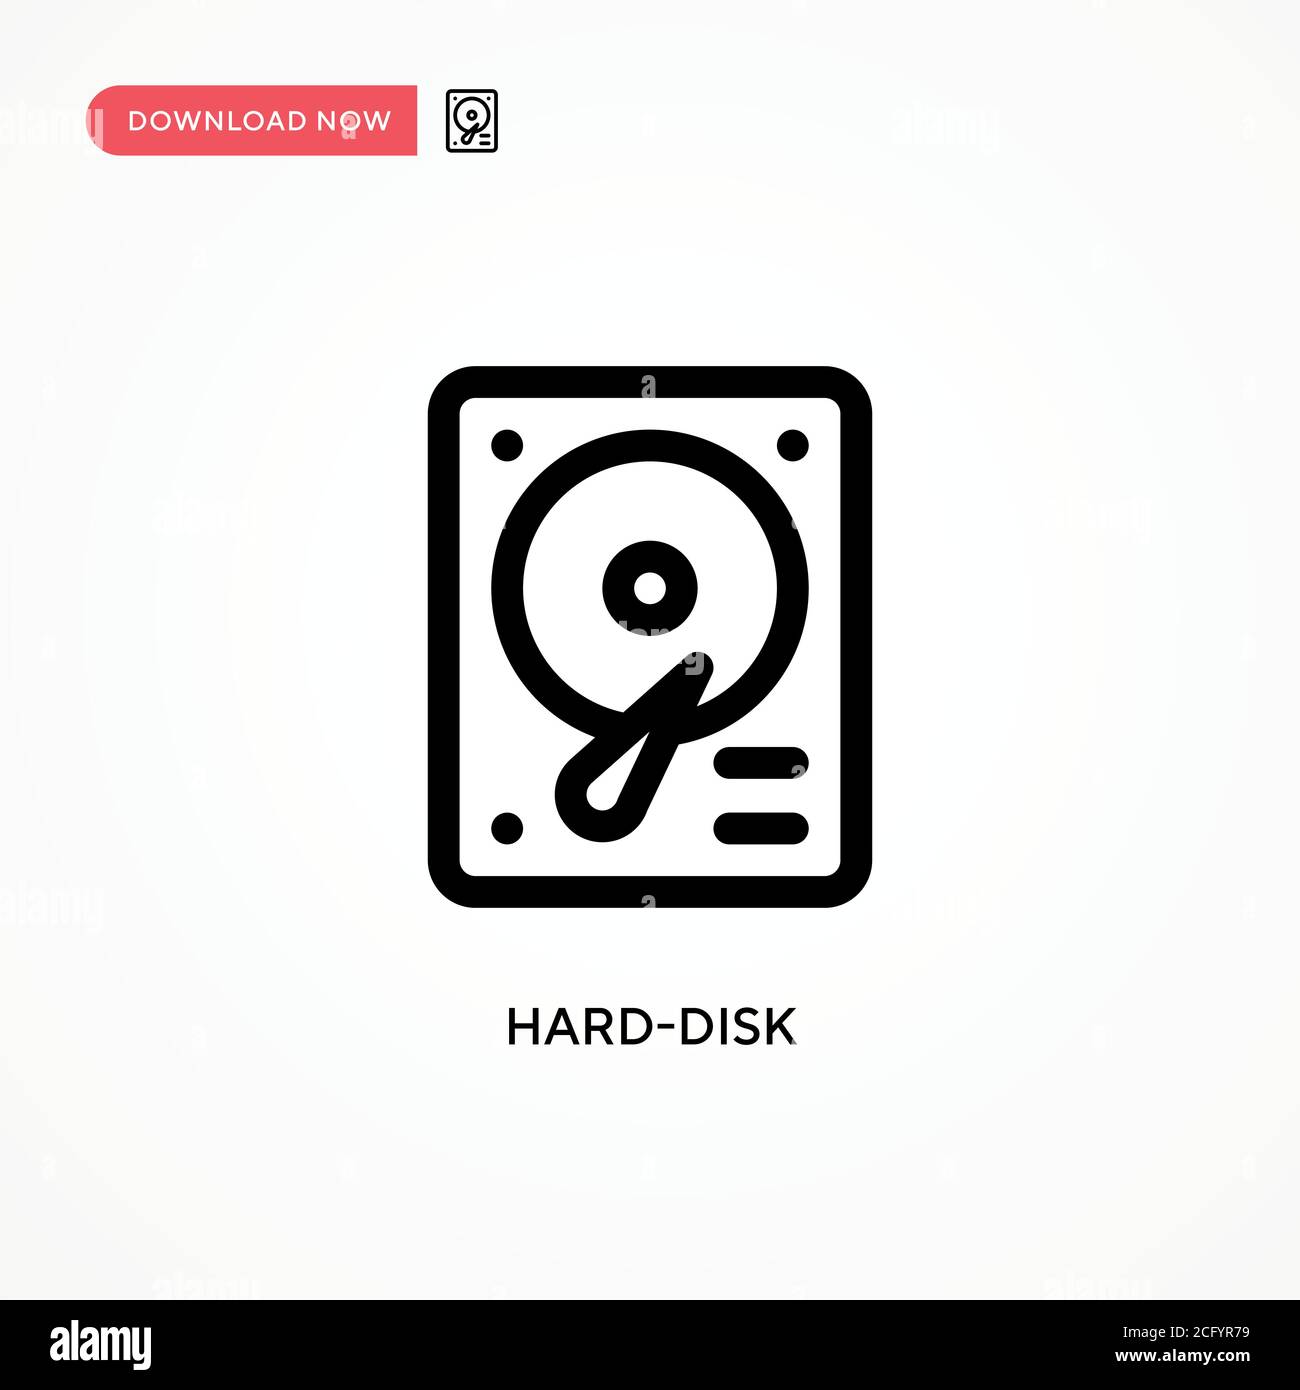 Hard-disk Simple vector icon. Modern, simple flat vector illustration for web site or mobile app Stock Vector